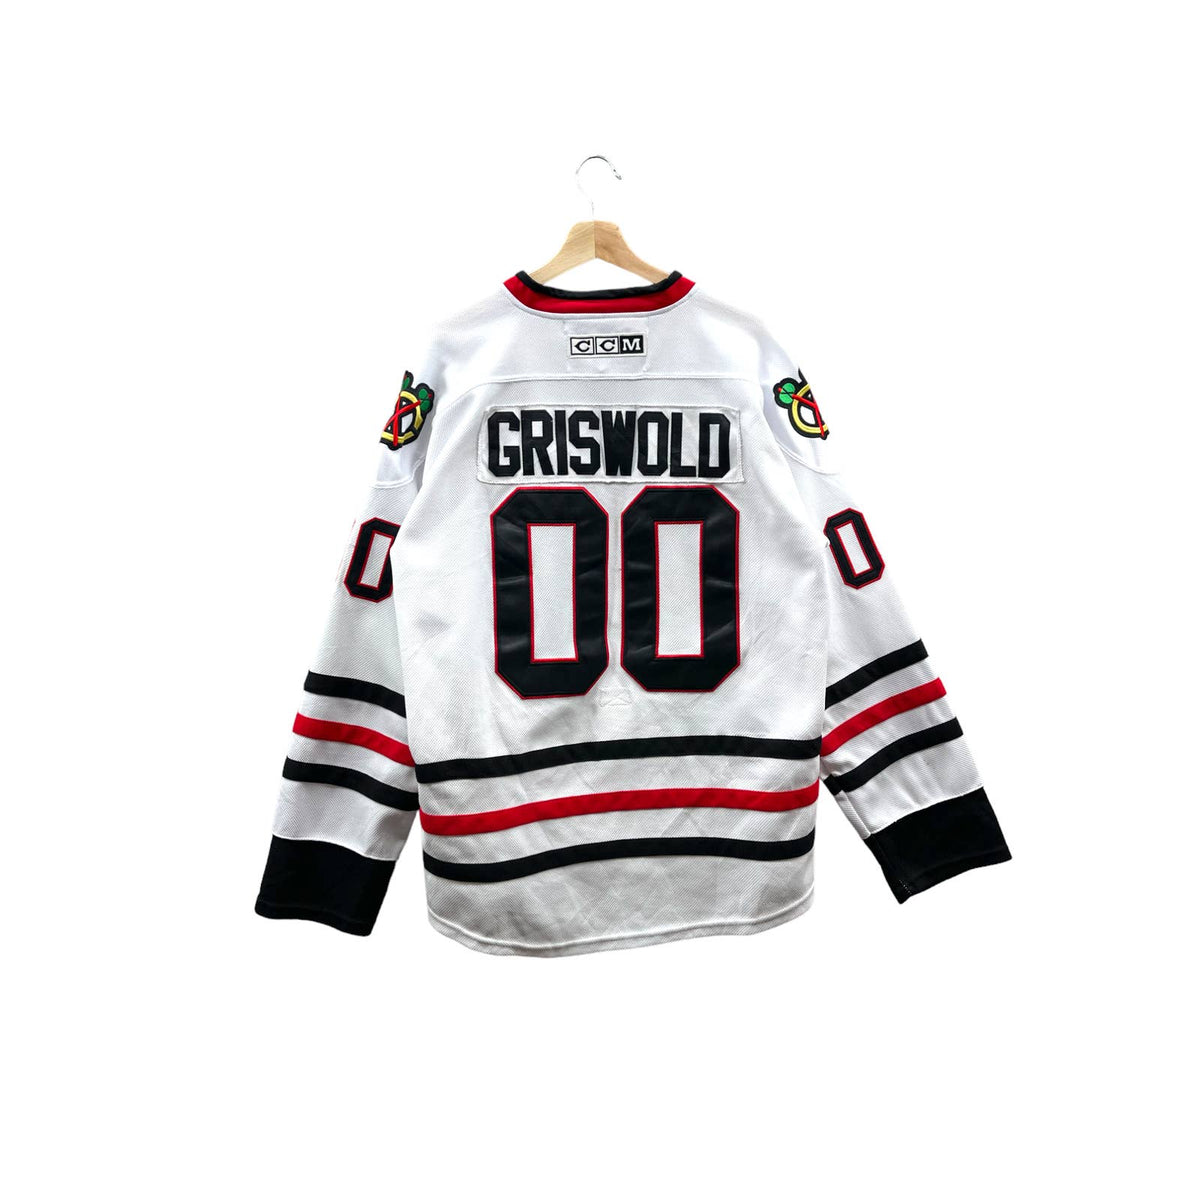 Vintage 1990's CCM Authentic Chicago Blackhawks Griswold NHL Hockey Jersey